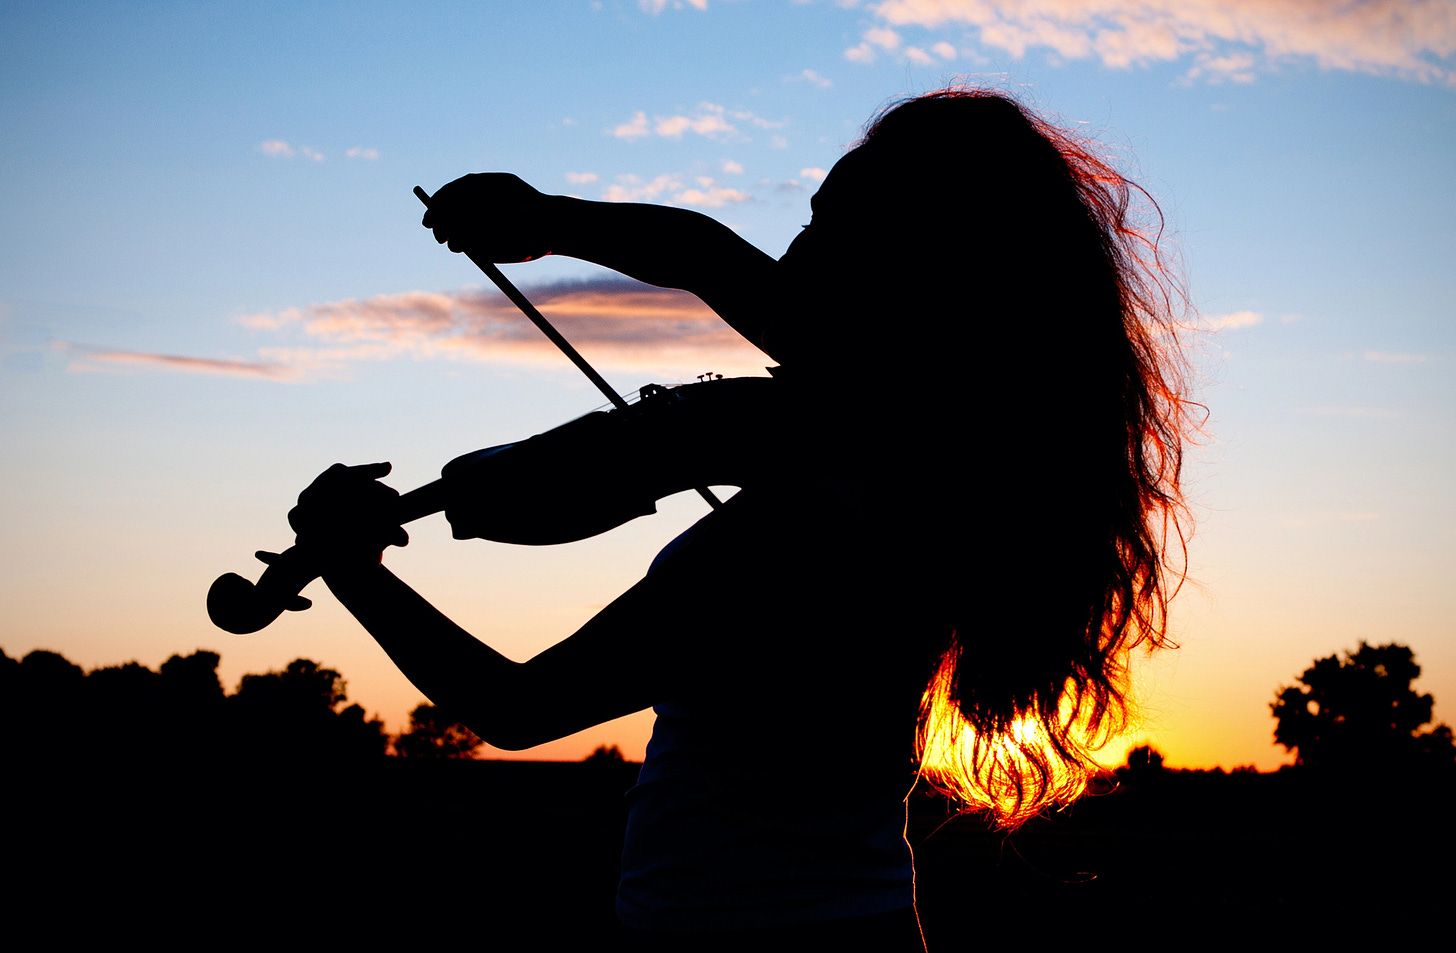 Long-haired young woman playing violin, silhouetted against the sunset in nature